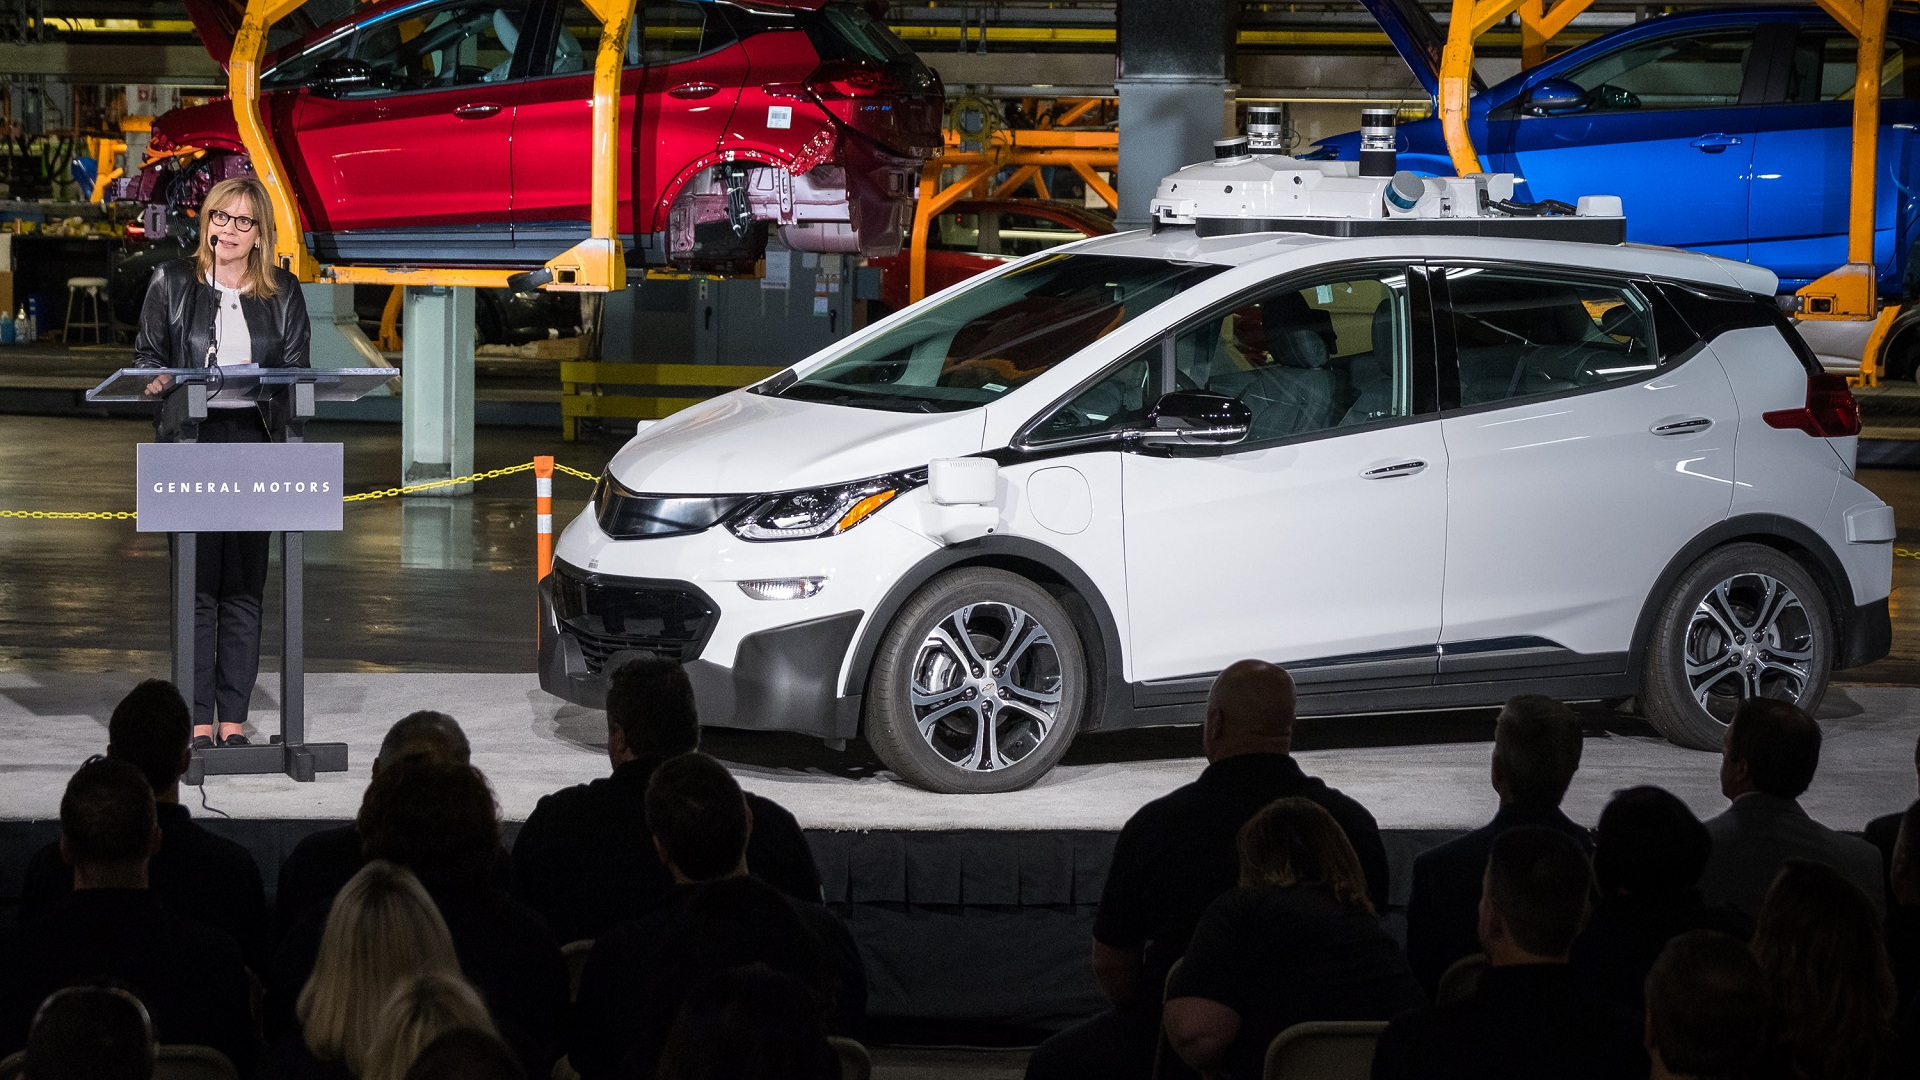 One of 130 second-generation self-driving Chevrolet Bolt EV electric cars, with GM CEO Mary Barra